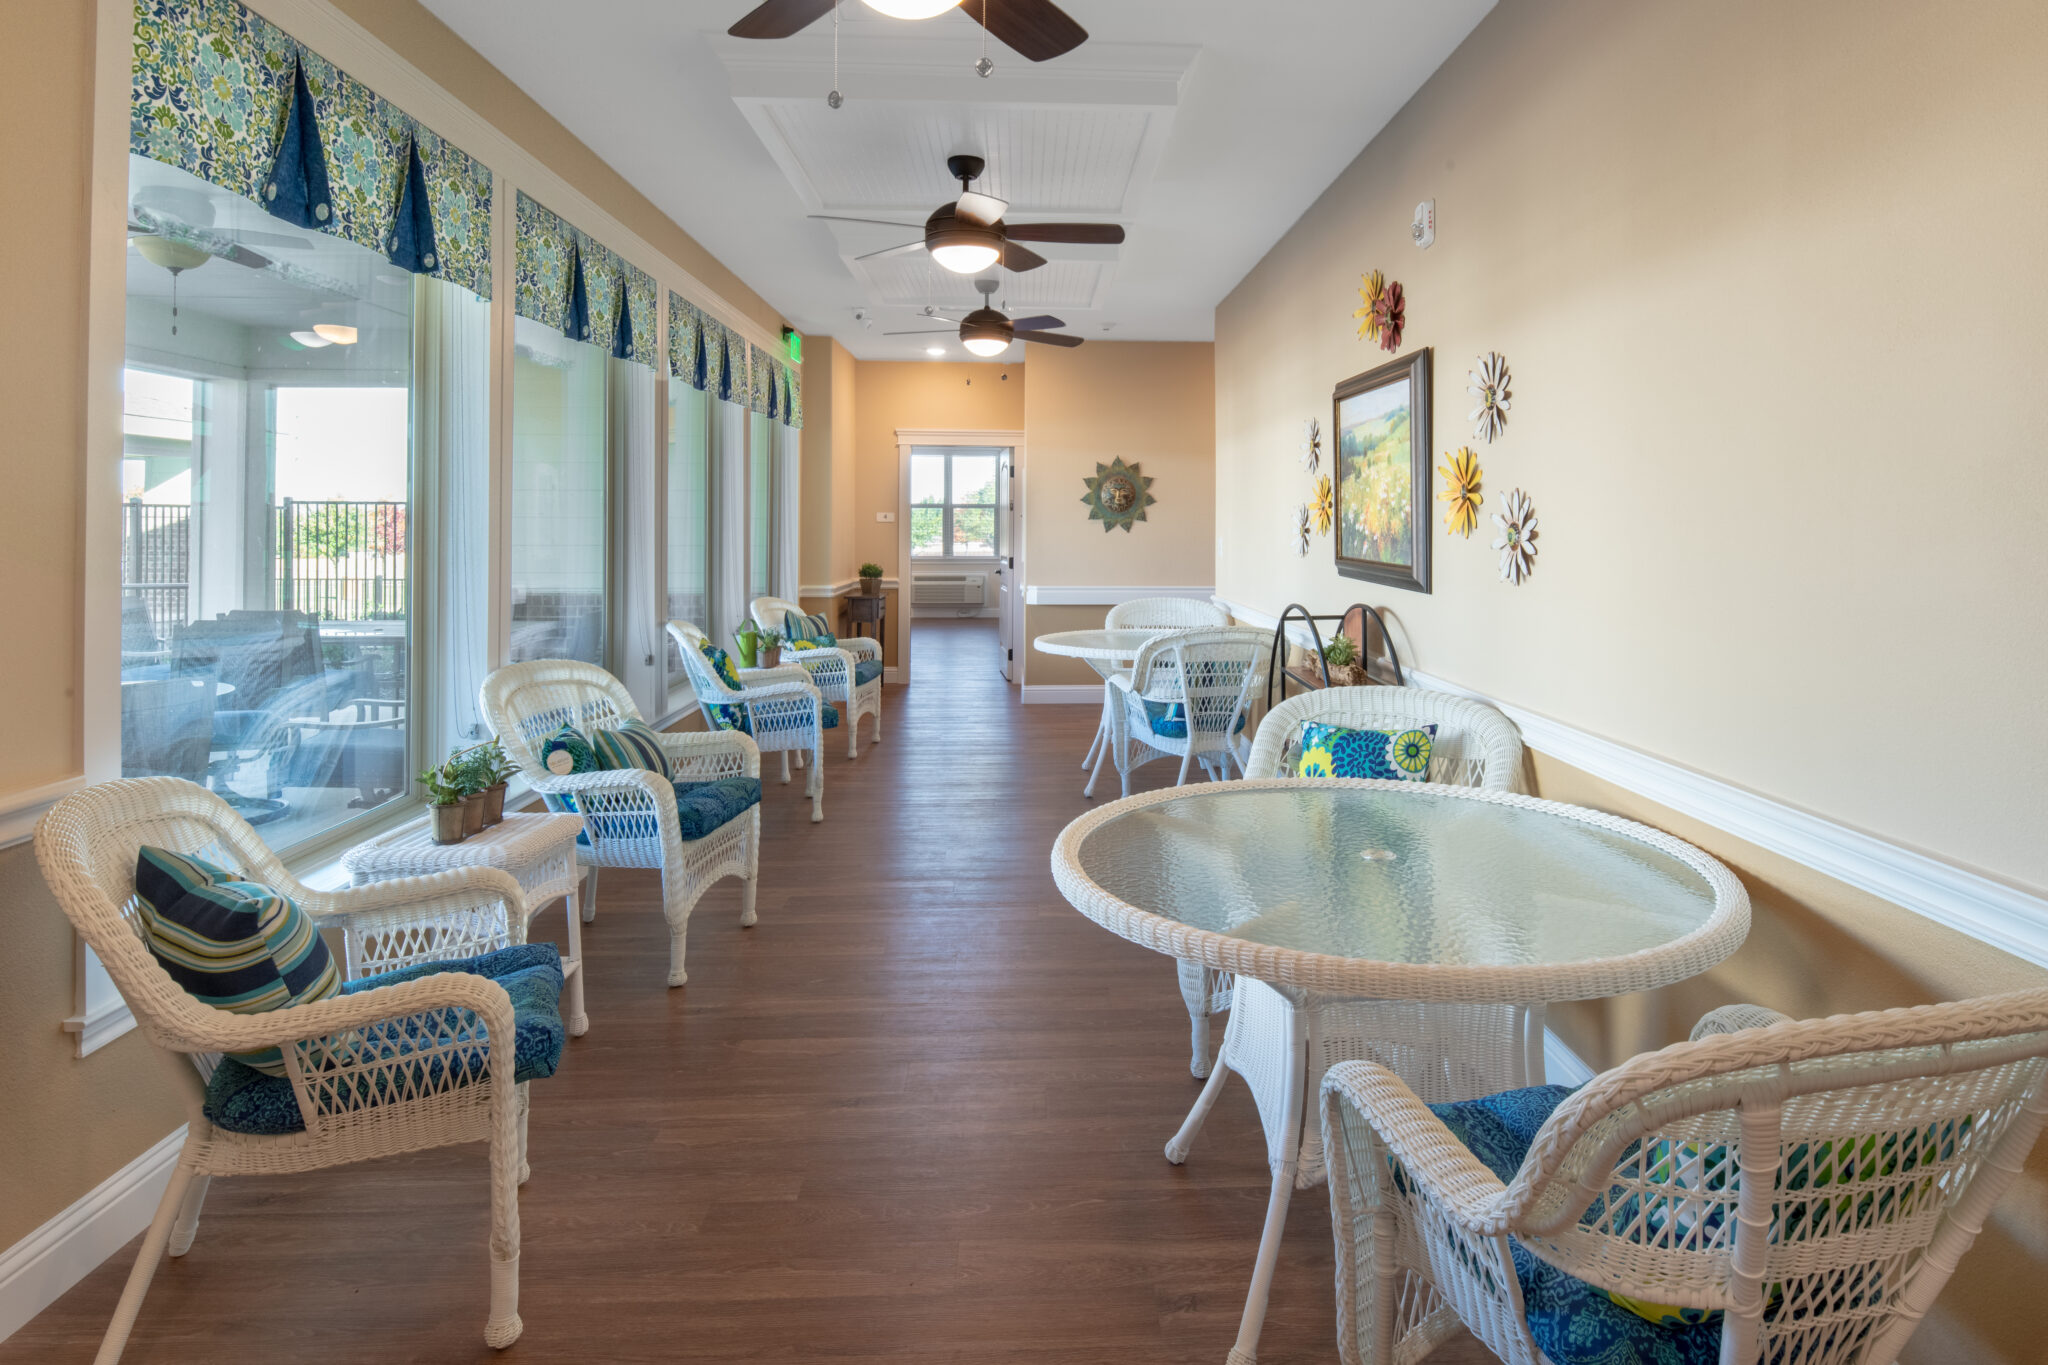 Sitting room in assisted living facility: Beige walls, wood floors, large windows for natural light, white wicker chairs, and wicker tables with glass tops.